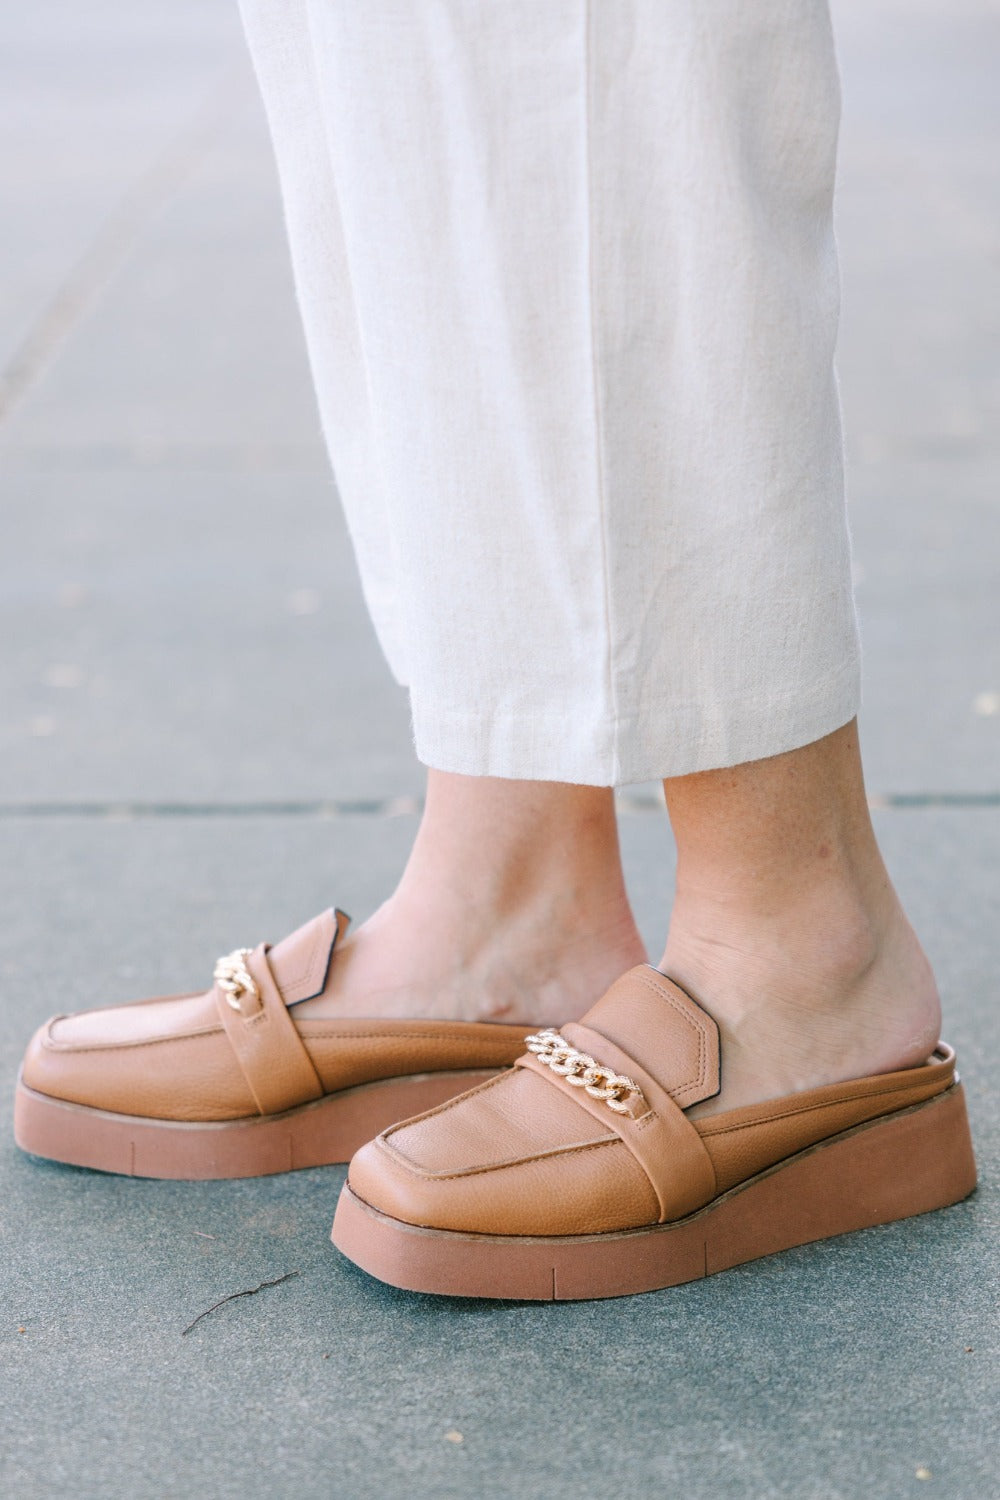 Elect in Camel Platform Mules by Naked Feet